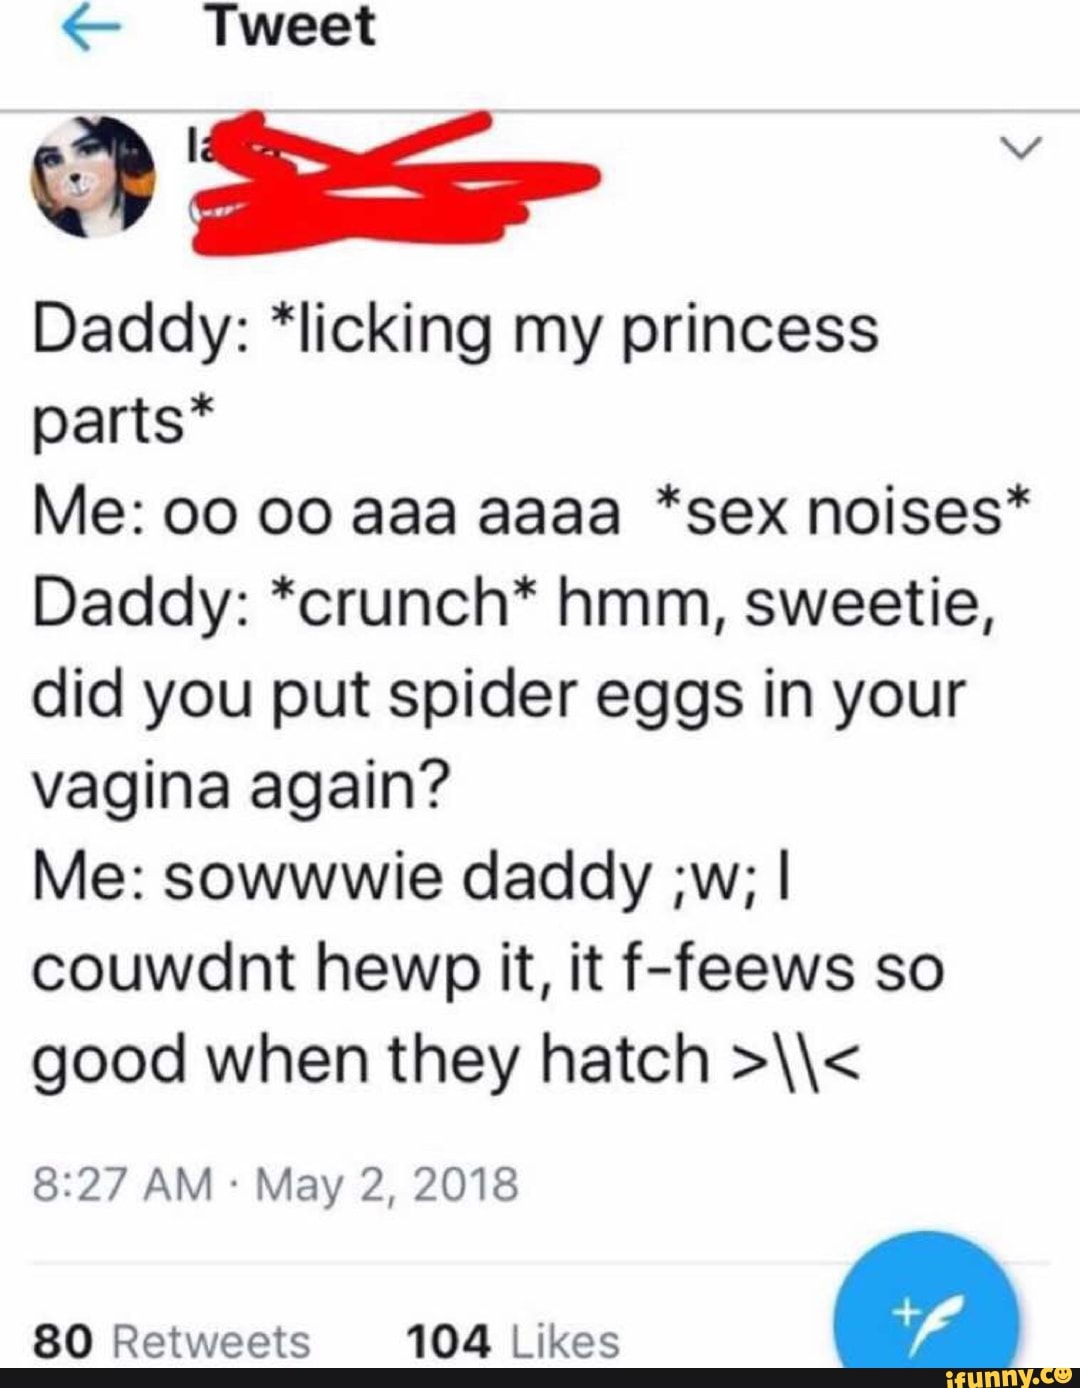 Tweet E P Daddy Licking My Princess Parts Me 00 00 Aaa Aaaa Sex Noises Daddy Crunch Hmm Sweetie Did You Put Spider Eggs In Your Vagina Again Me Sowwwie Daddy W - fuck need to get some roblox crunch tweet added by how the